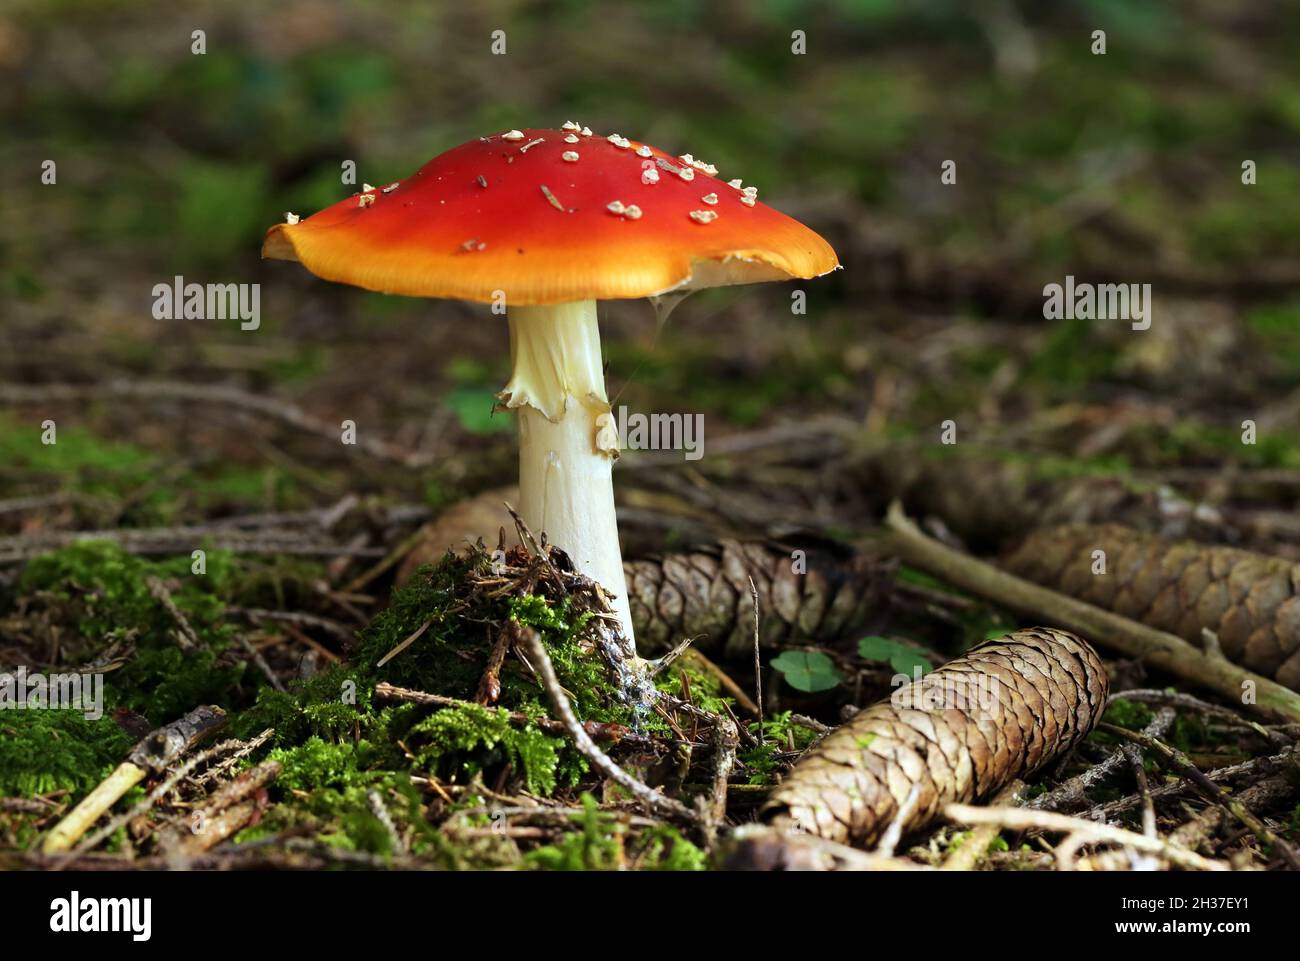 Beautiful toadstool with pine cones in forest Stock Photo